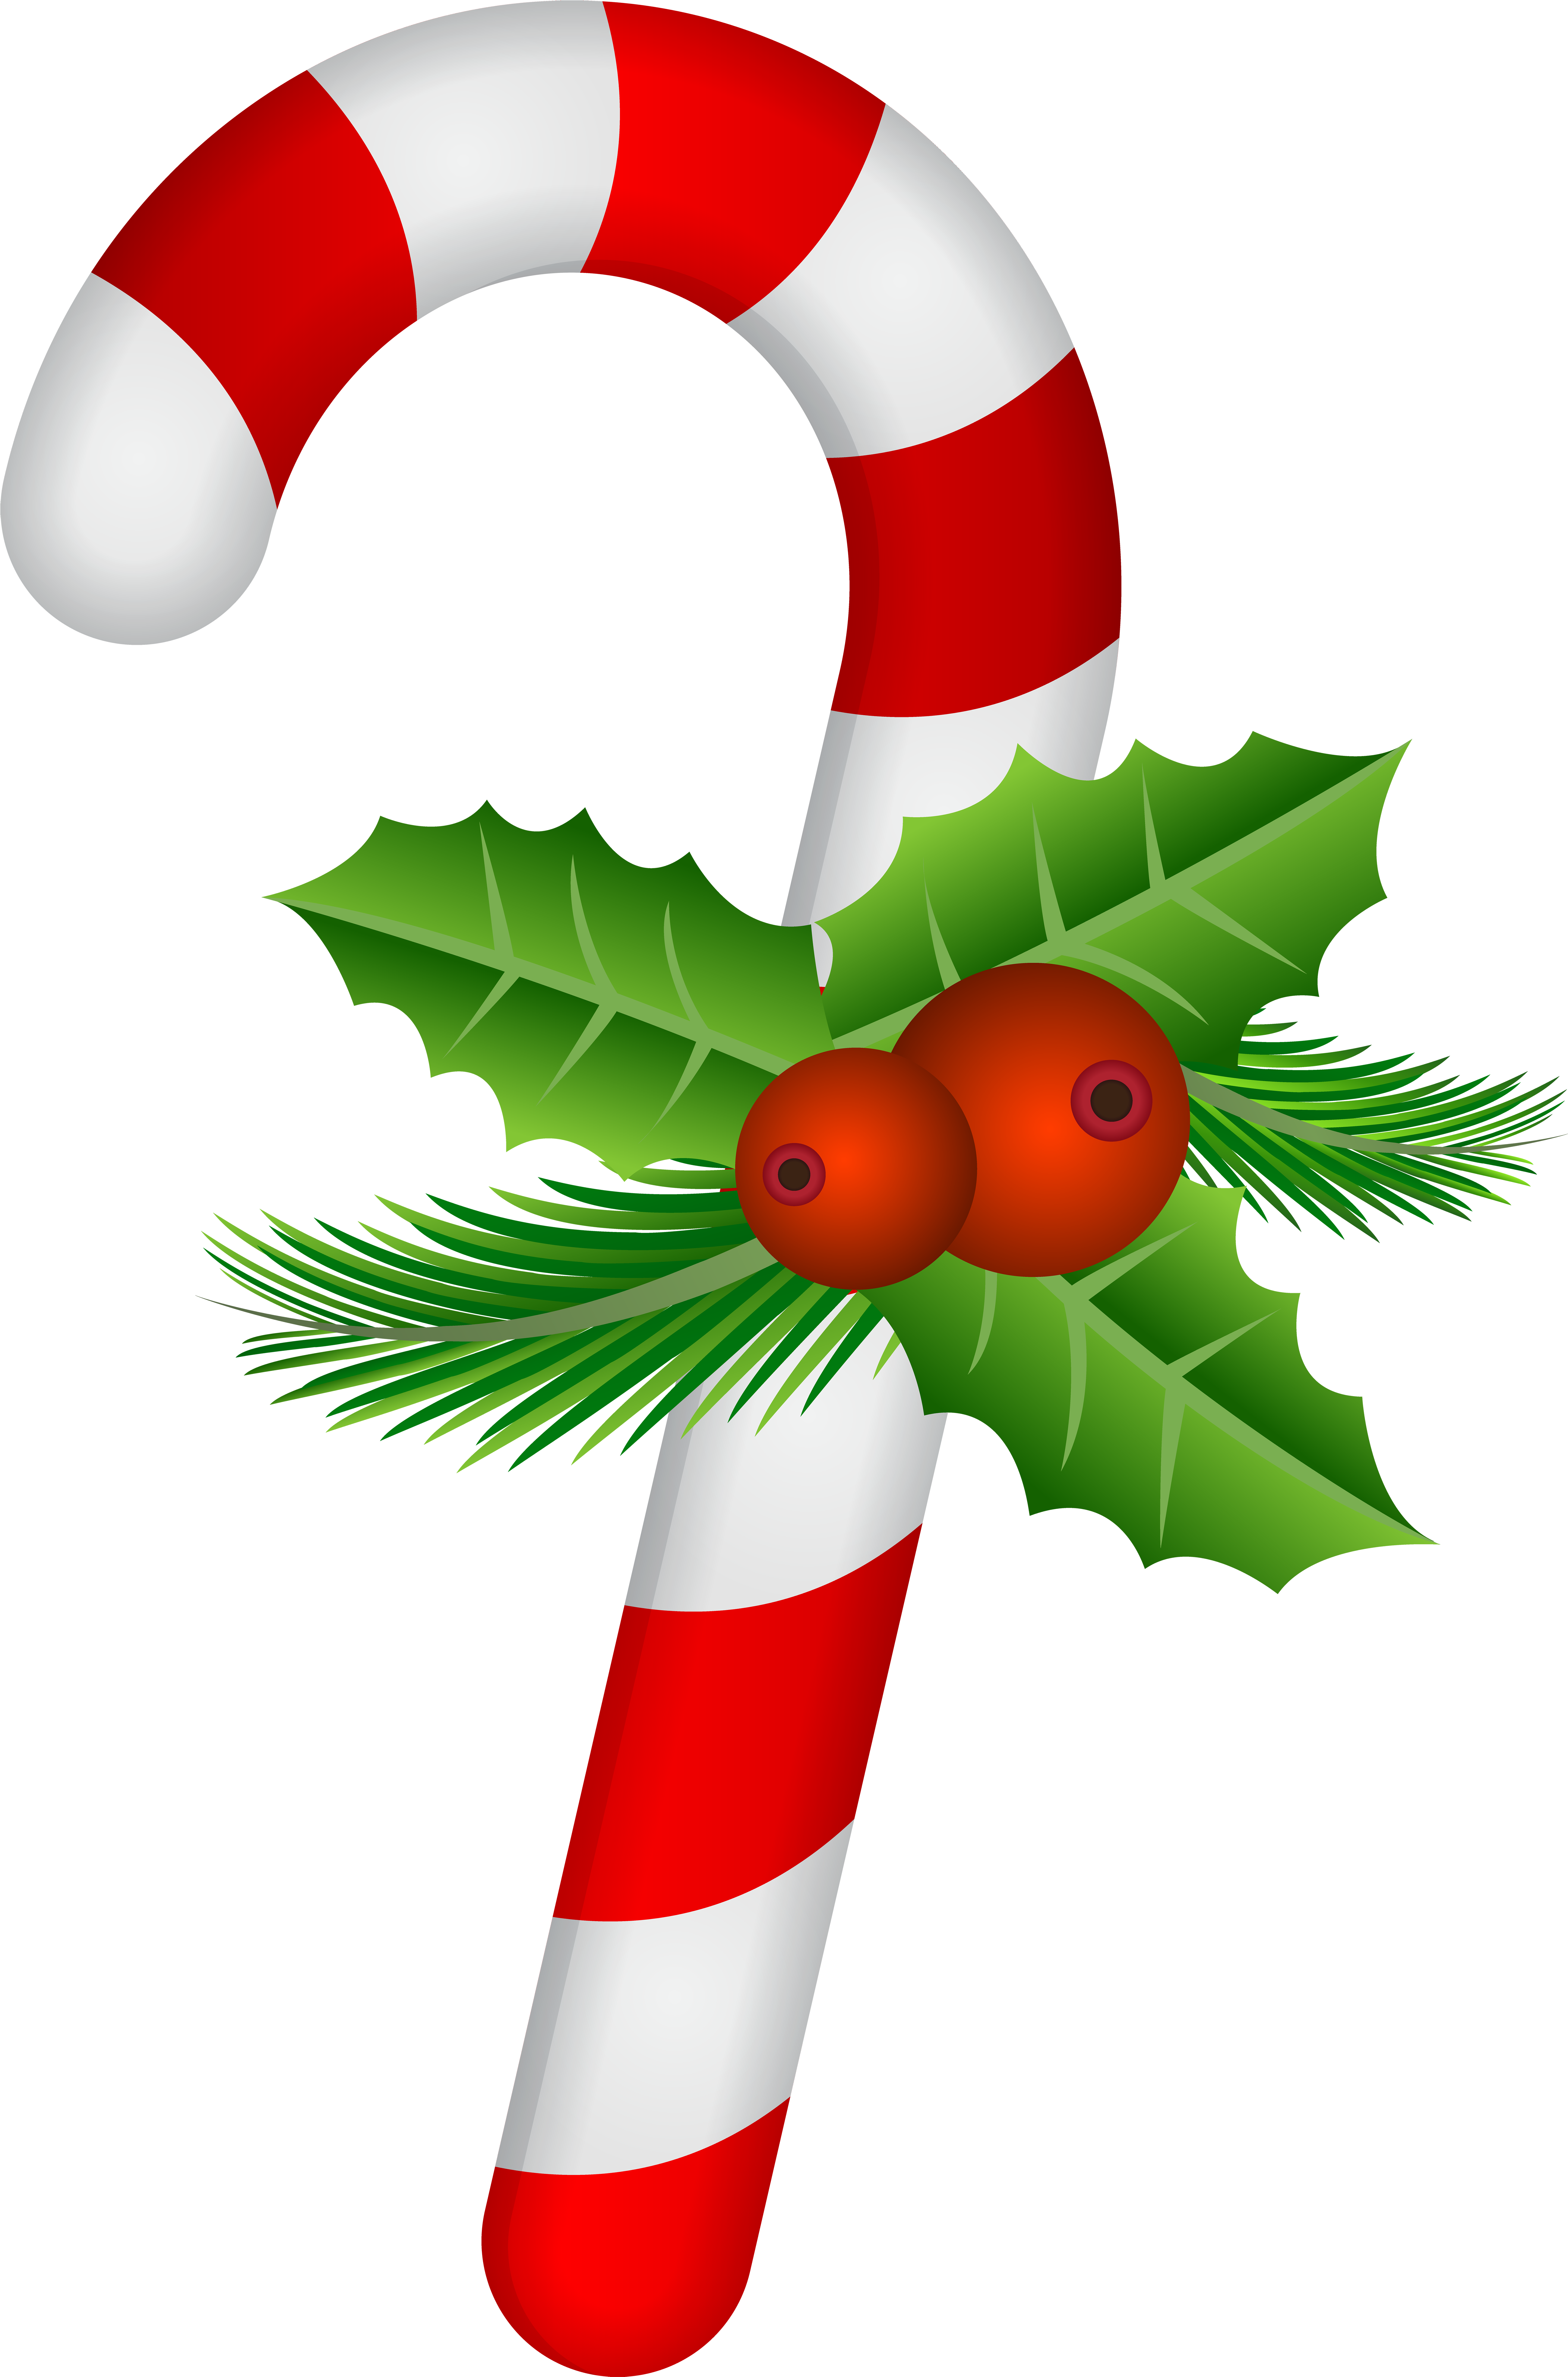 A Candy Cane With Berries On Top